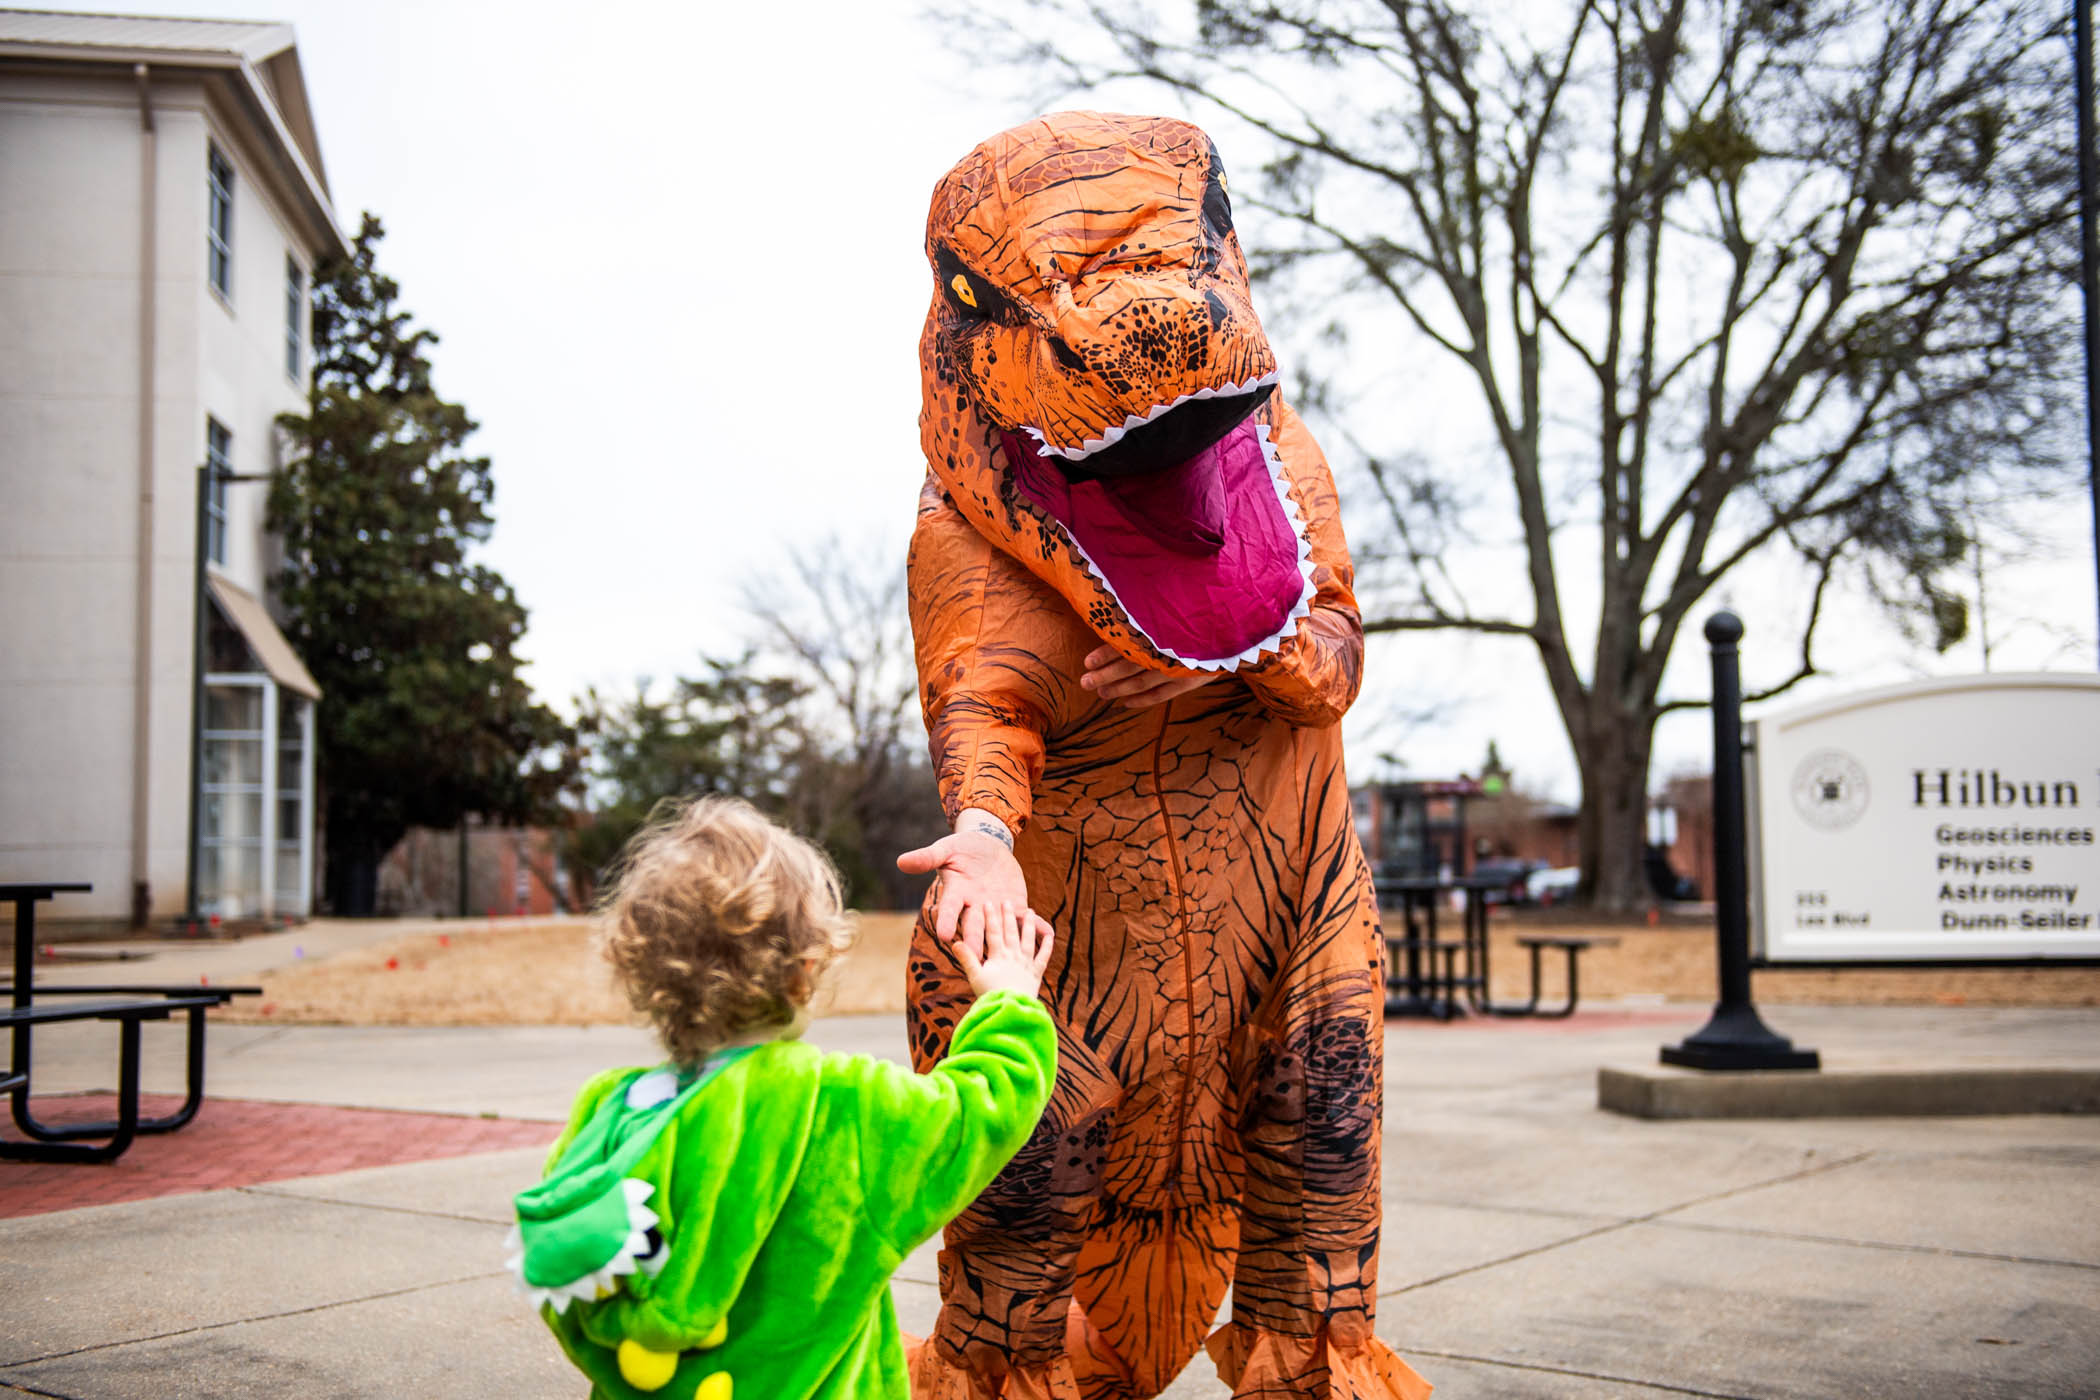 Jamie, a one-year-old explorer from Starkville, high-fives a &quot;T-Rex&quot; at MSU&#039;s annual &quot;Science Night at the Museums.&quot; Held at Hilbun Hall and Cobb Institute of Archaeology, this engaging event welcomed participants to fascinating exhibits and hands-on activities centered around the wonders of science.